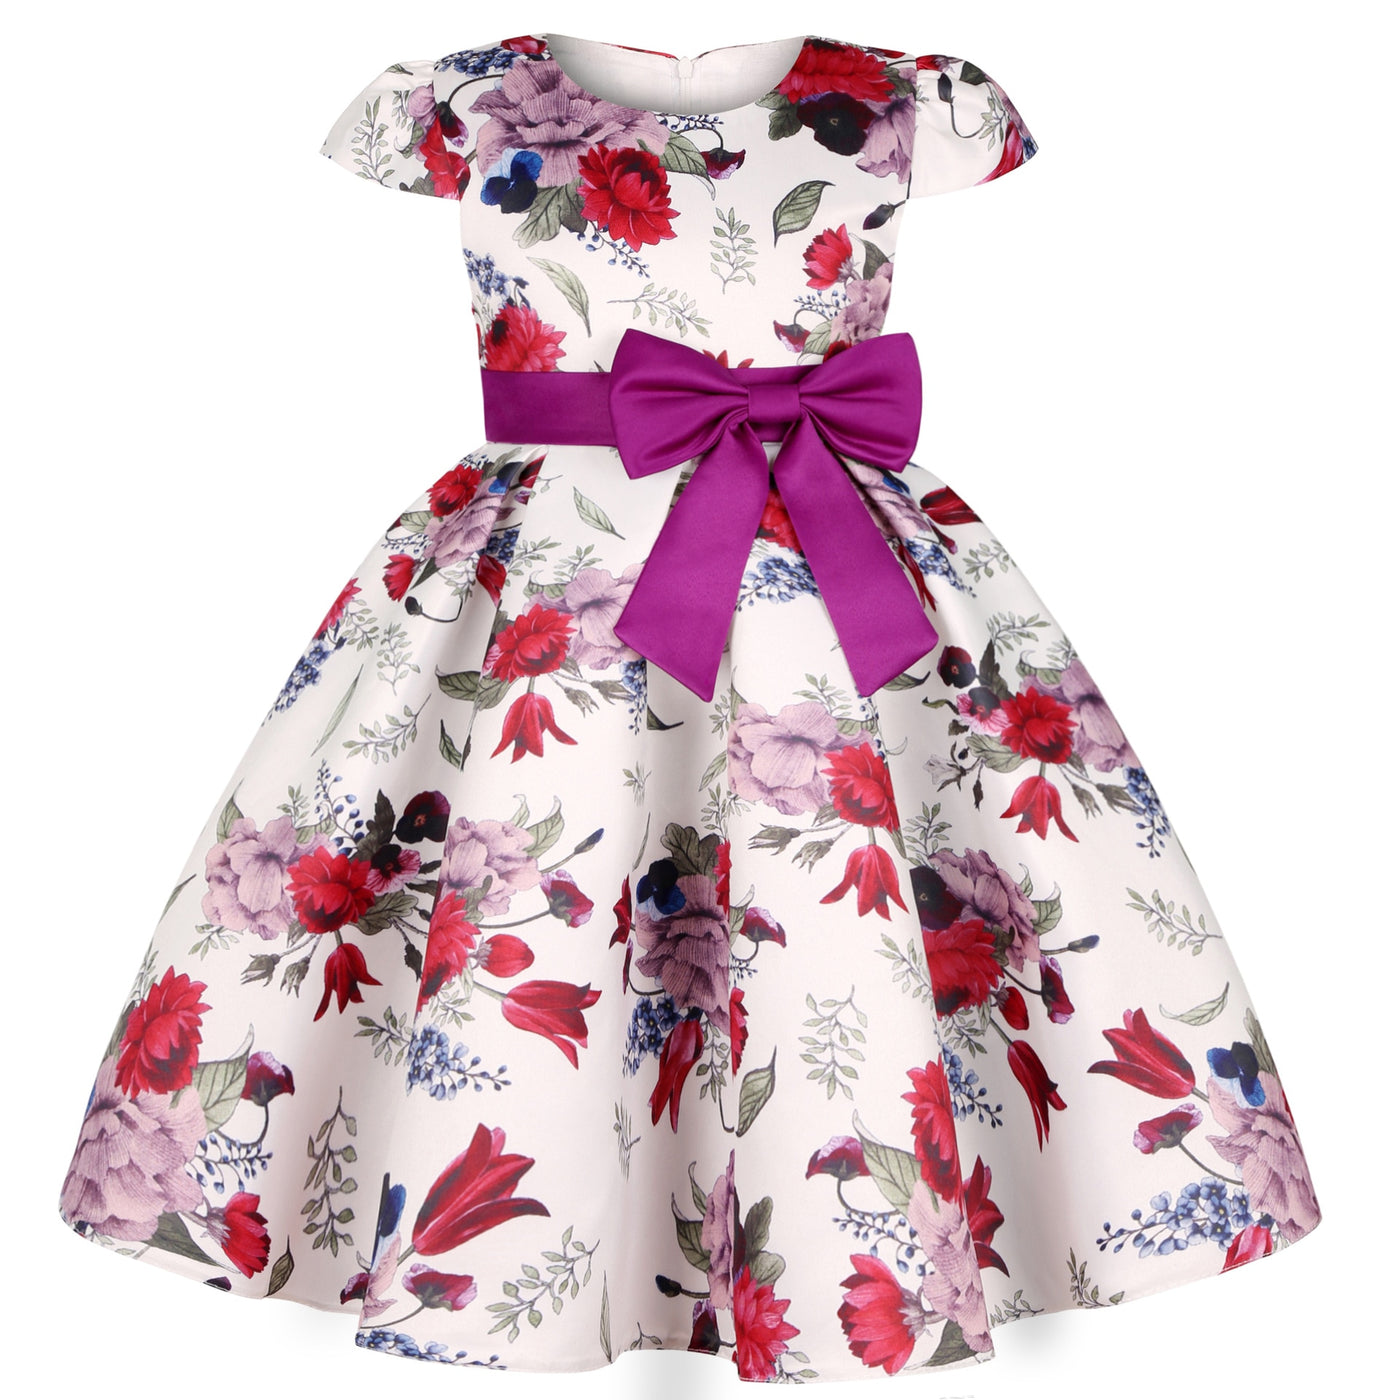 Retro Floral Bowknot Dress 2-10T Toddler Girl Dress - Coco Potato - dresses and partywear for little girls